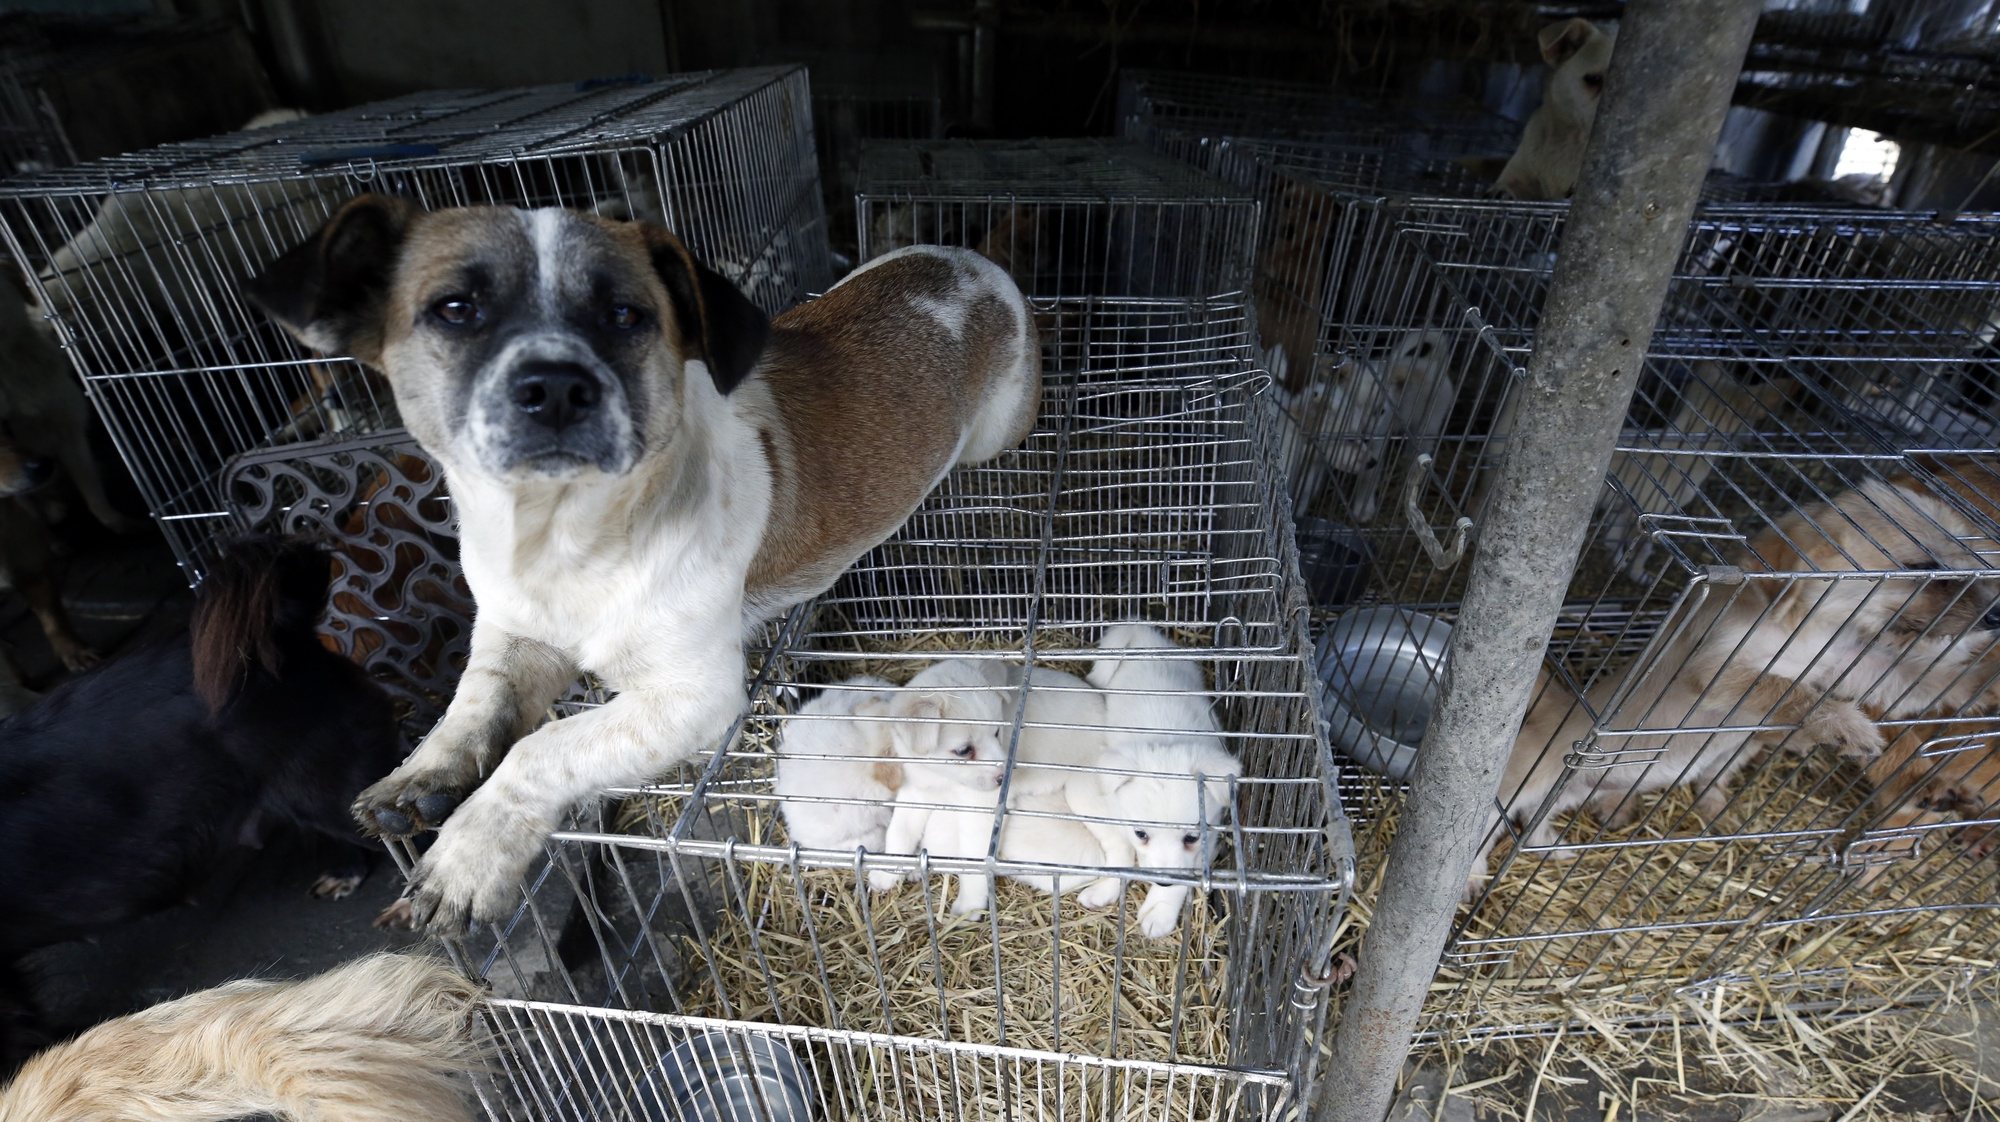 epa07867901 Dogs sit in the private Aerinwon abandonment animal shelter in Pocheon, Gyeonggi province, South Korea, 25 September 2019. Authorities on 25 September removed all the animals from the shelter after the South Korean District Court issued a directive to close the shelter. According to government data, annually abandoned animals stood at 102,593 in 2017, up from 81,147 in 2014.  EPA/JEON HEON-KYUN  ATTENTION: This Image is part of a PHOTO SET